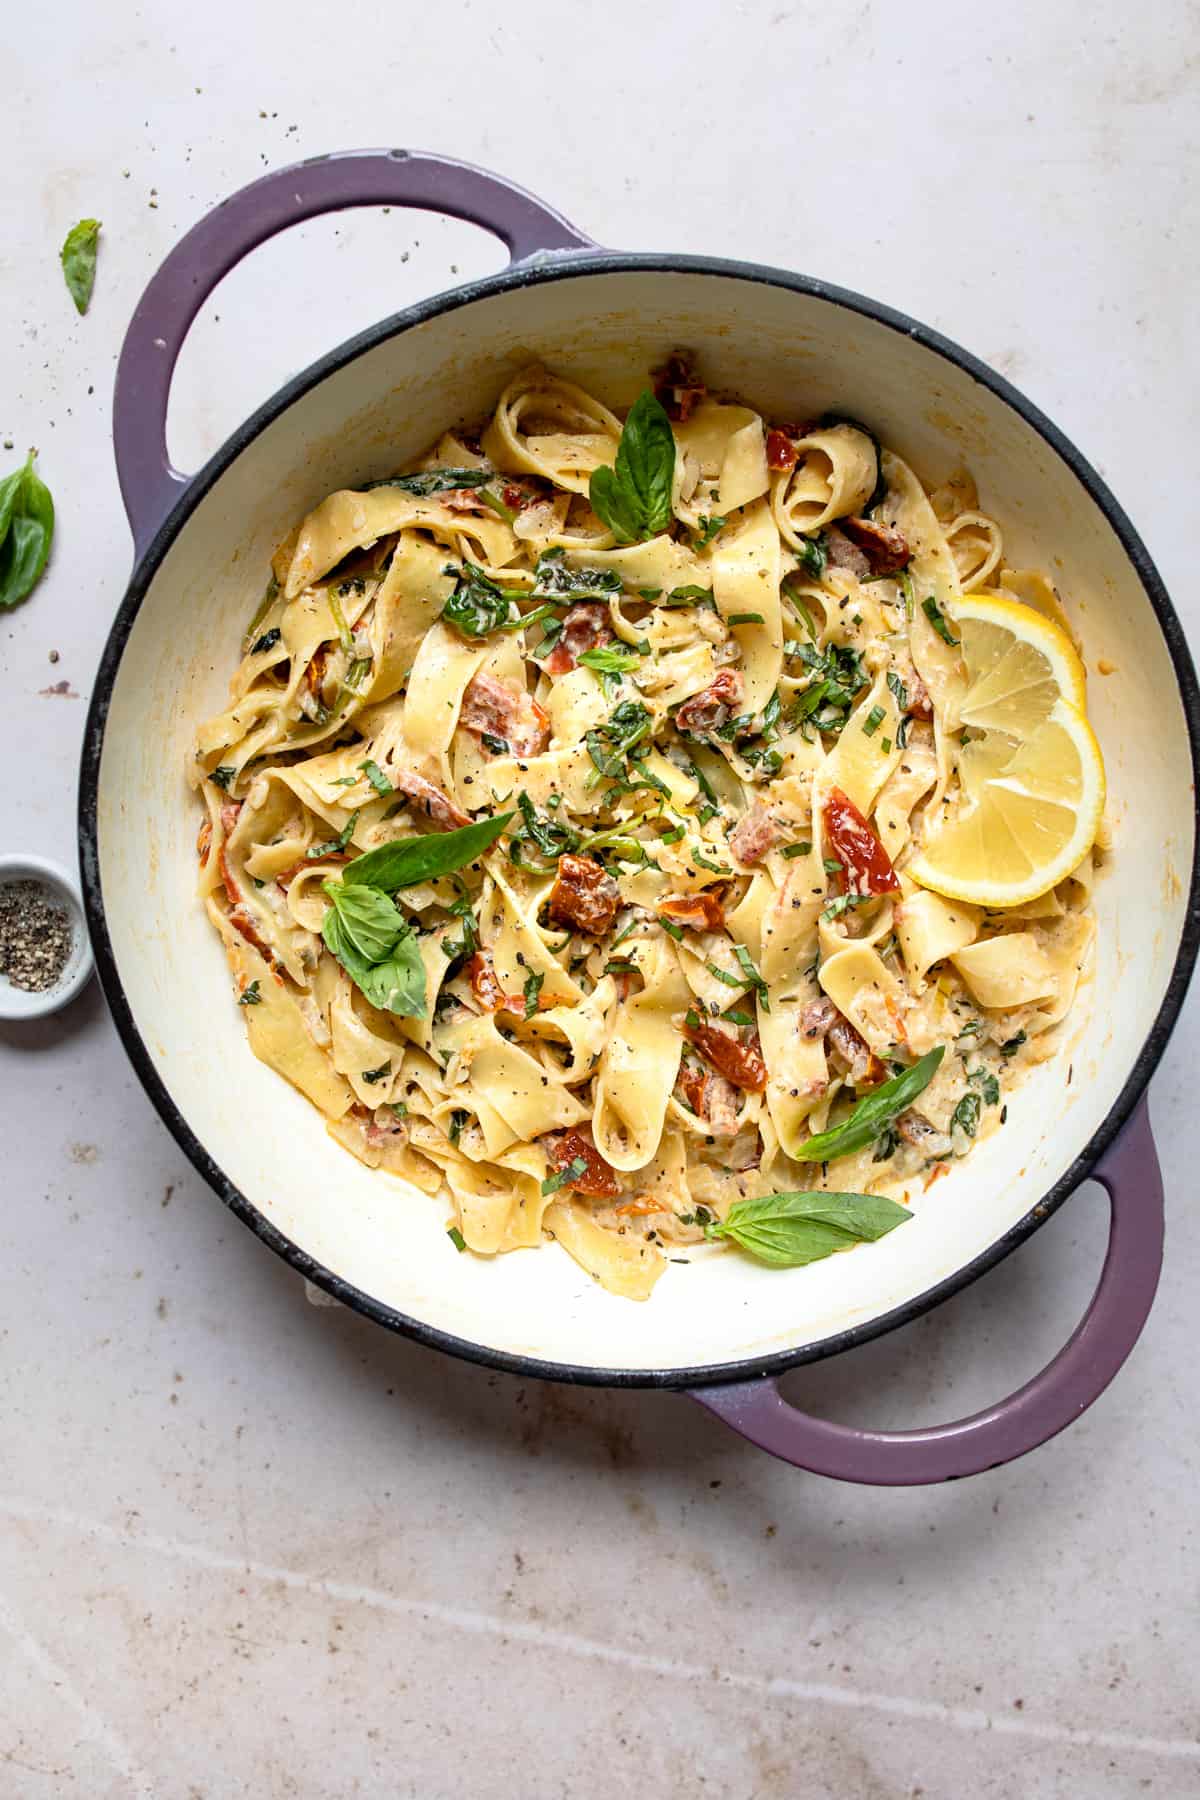 Creamy sundried tomato pasta in a pan with lemons and basil- healthy aldi recipes